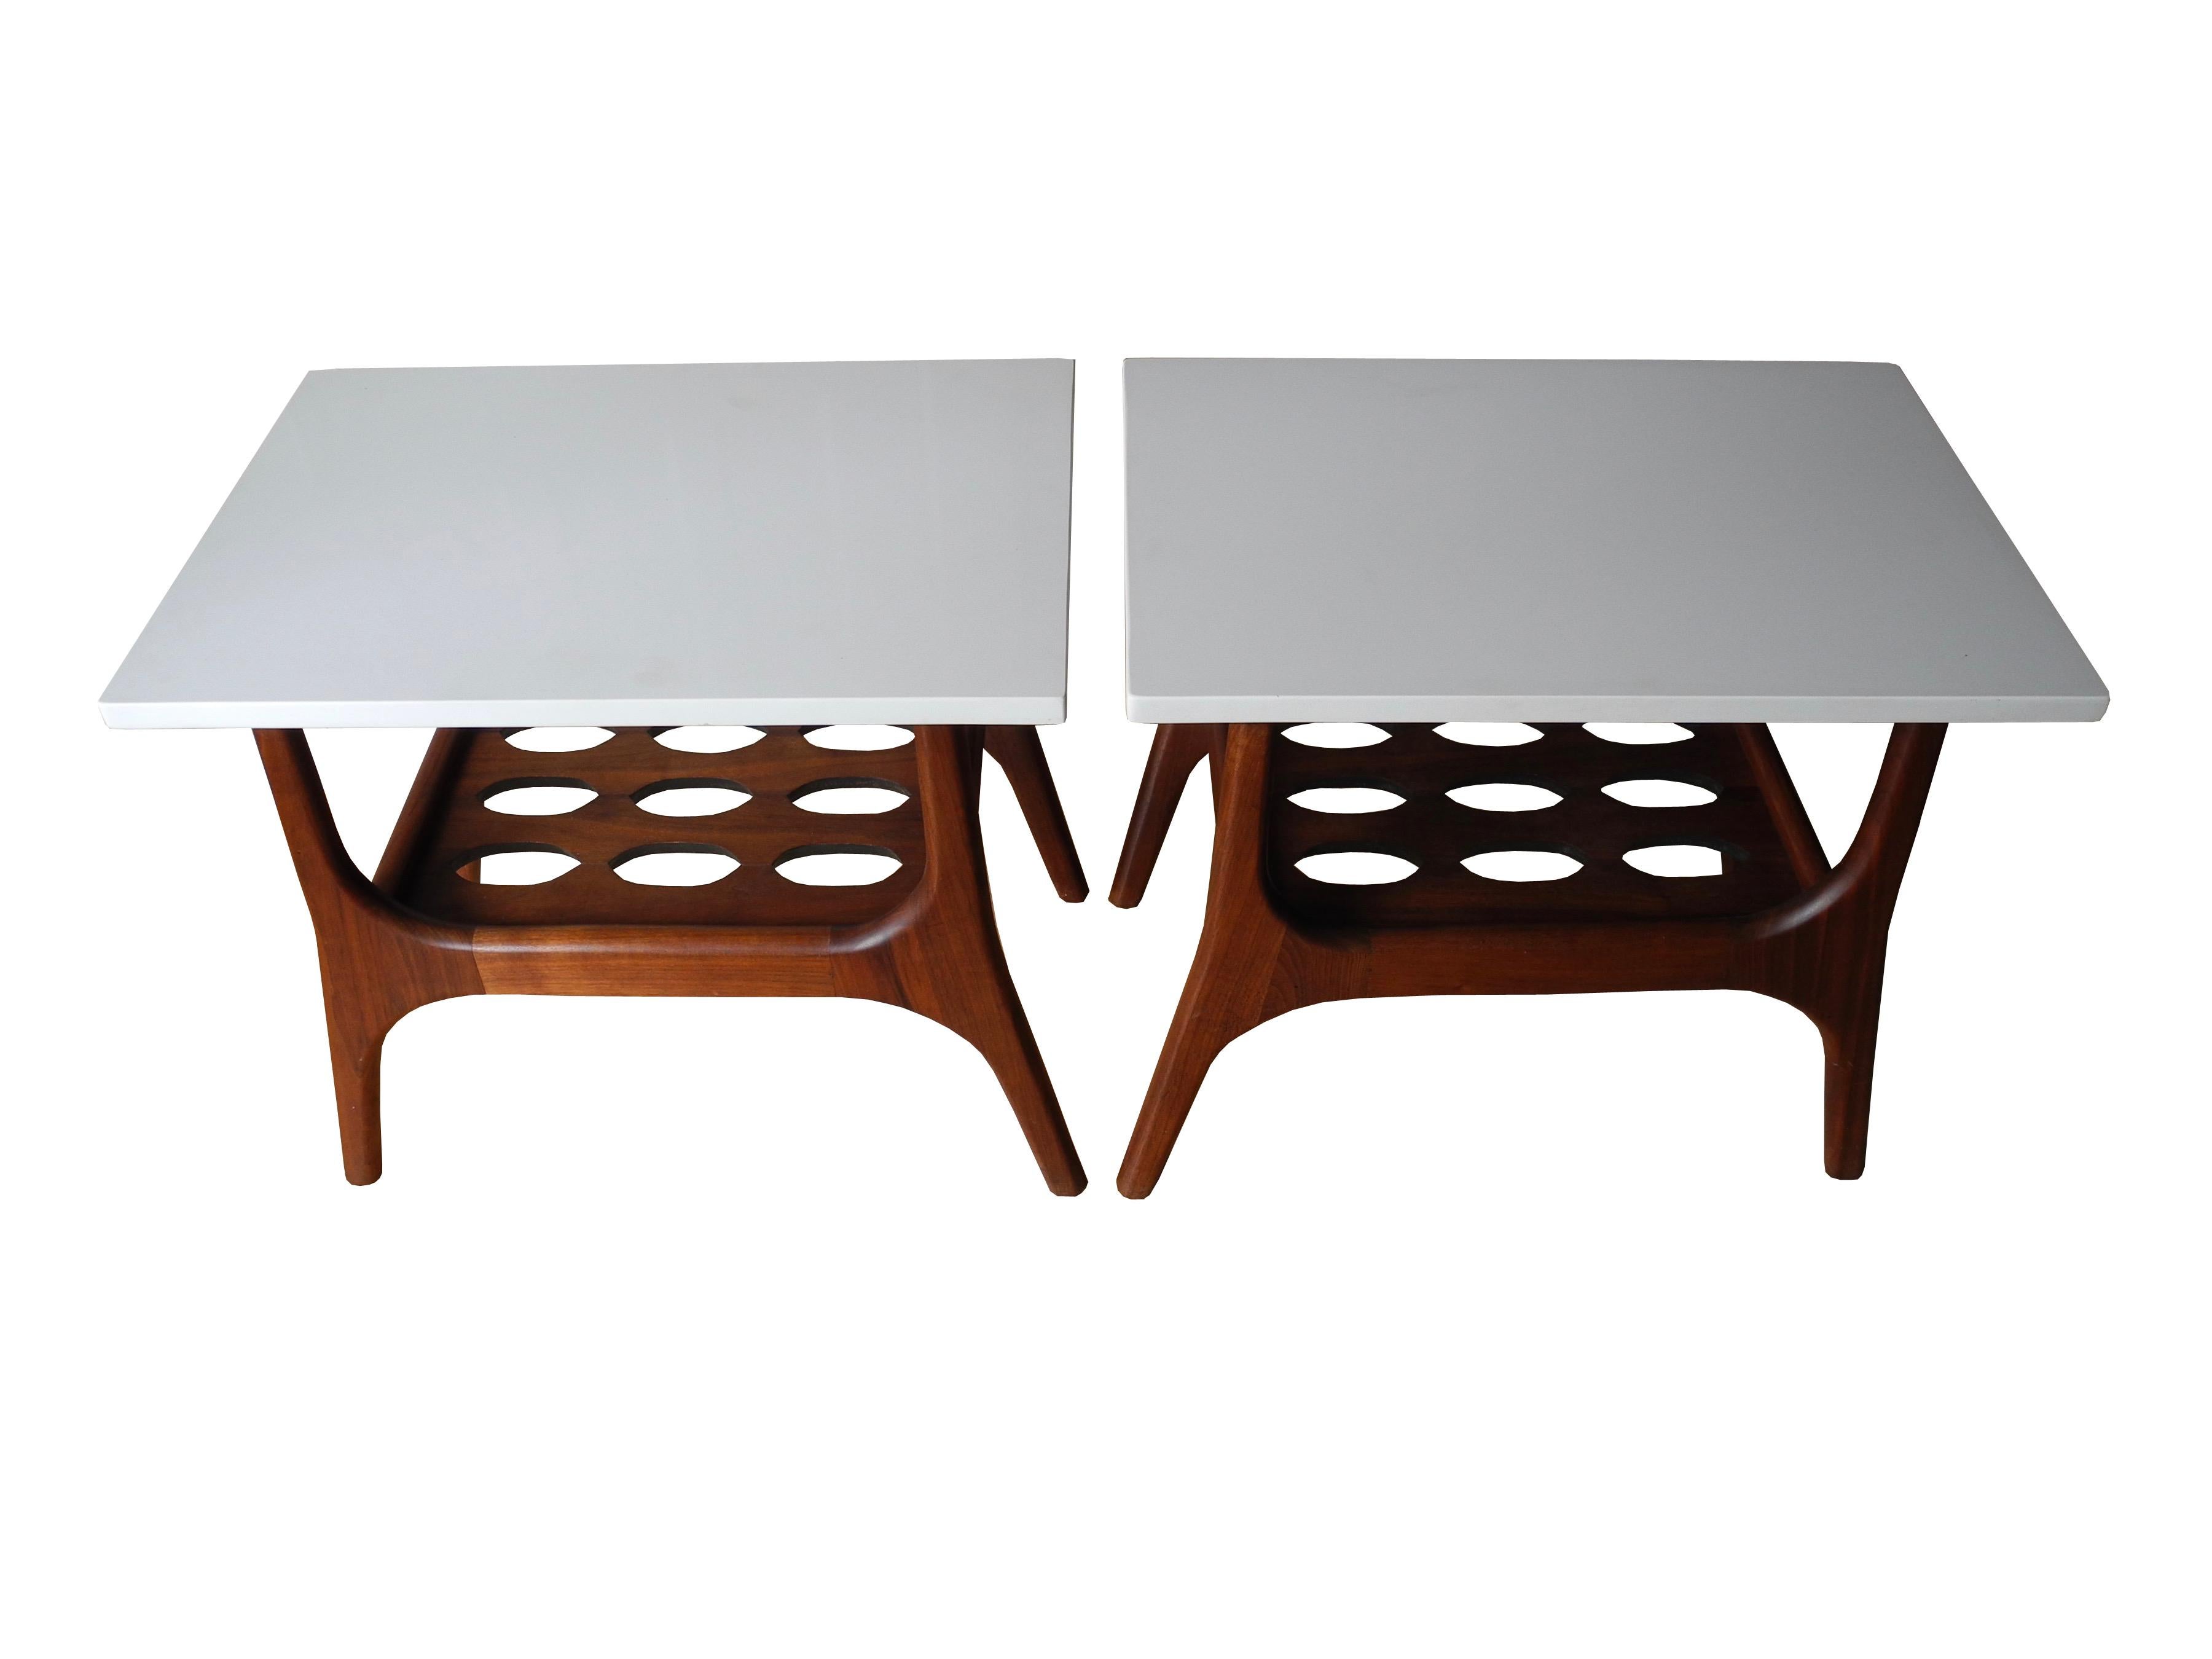 American Mid-Century Modern Pair of Walnut and White Quartz Nightstands or Side Tables For Sale